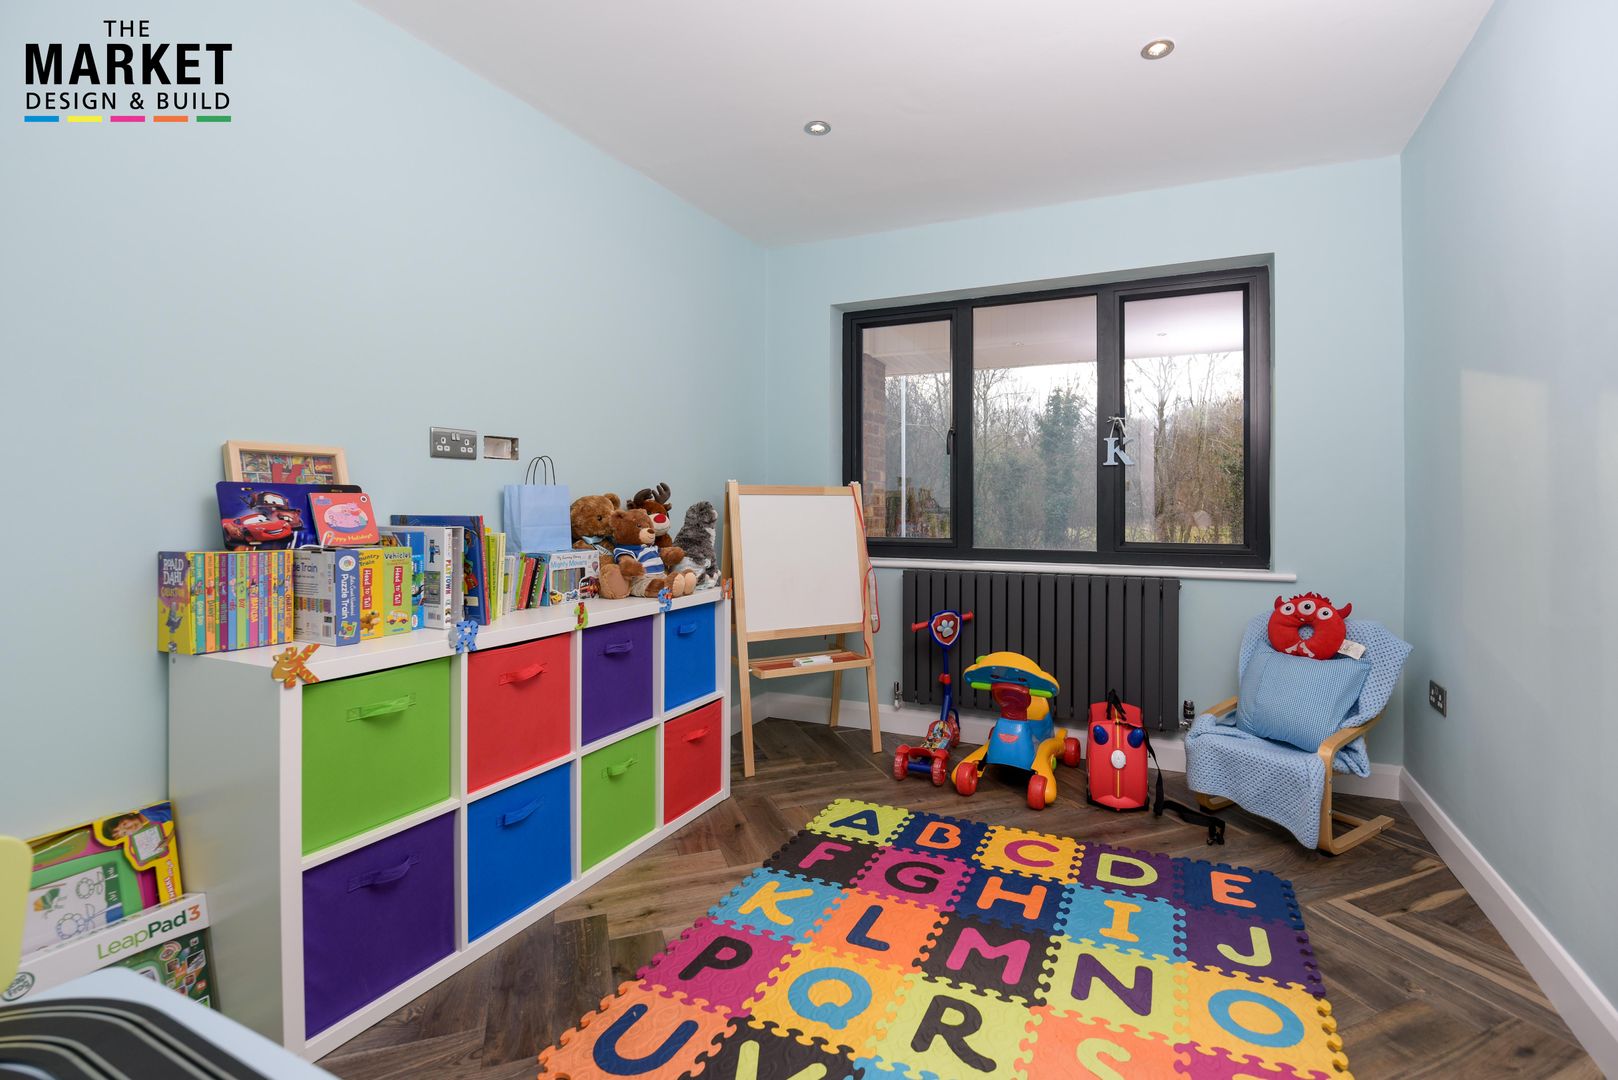 Pinner House Extension and loft Conversion, The Market Design & Build The Market Design & Build Modern nursery/kids room